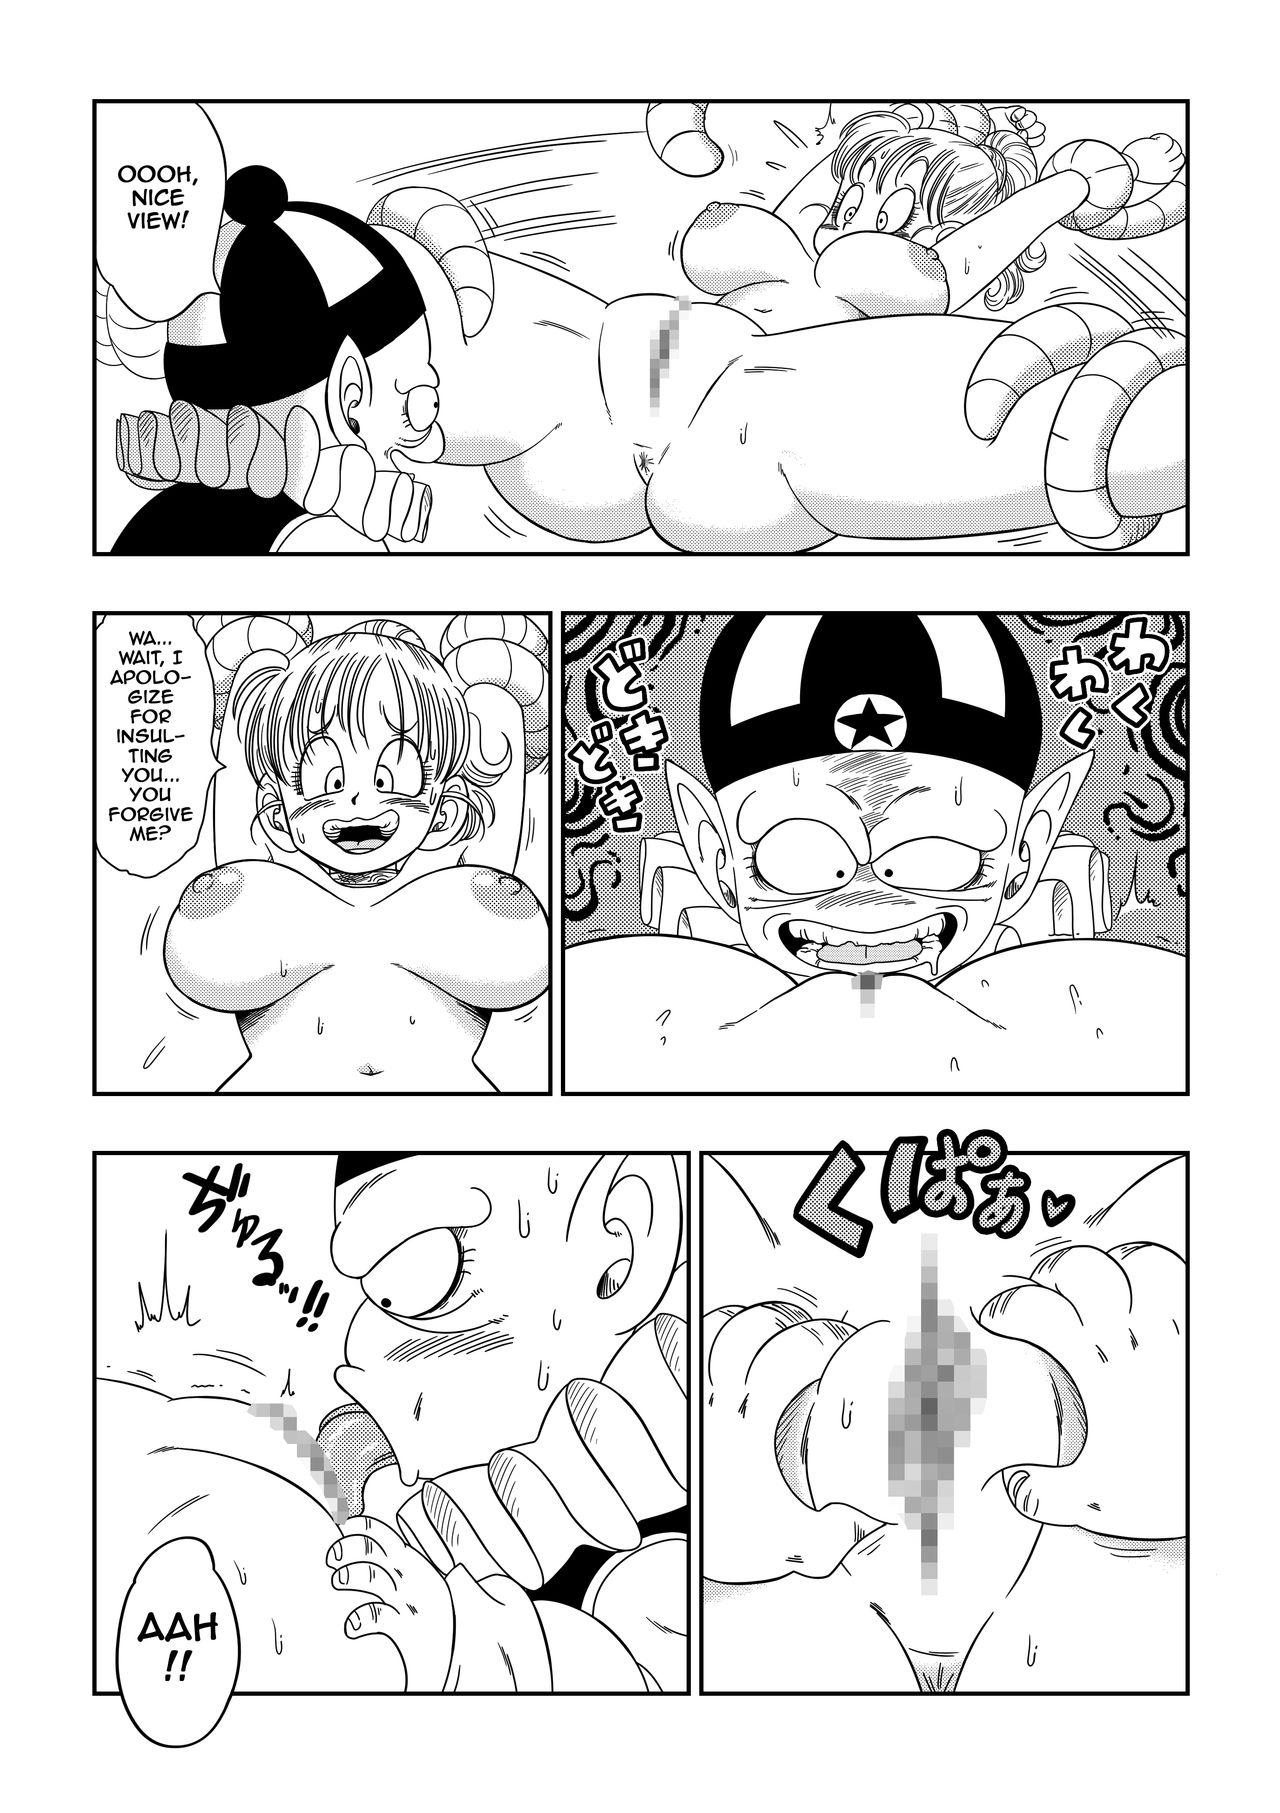 Blow Jobs Porn Dagon Ball - Punishment in Pilaf's Castle - Dragon ball Gets - Page 6